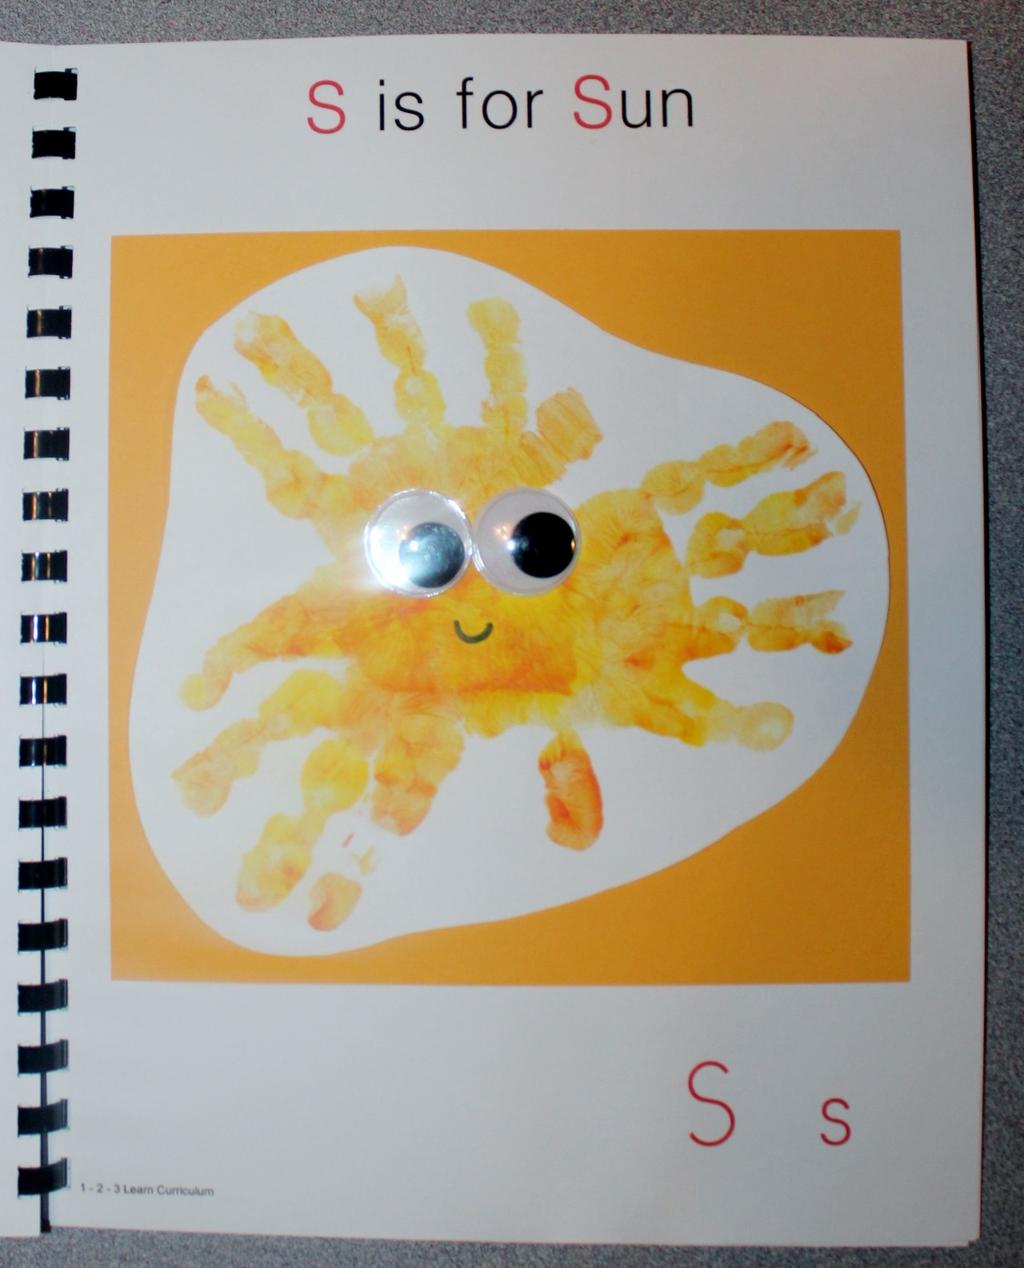 S is for Sun Paint the child s hand a combination of yellow and orange. (Just dot the orange first and then yellow on top).